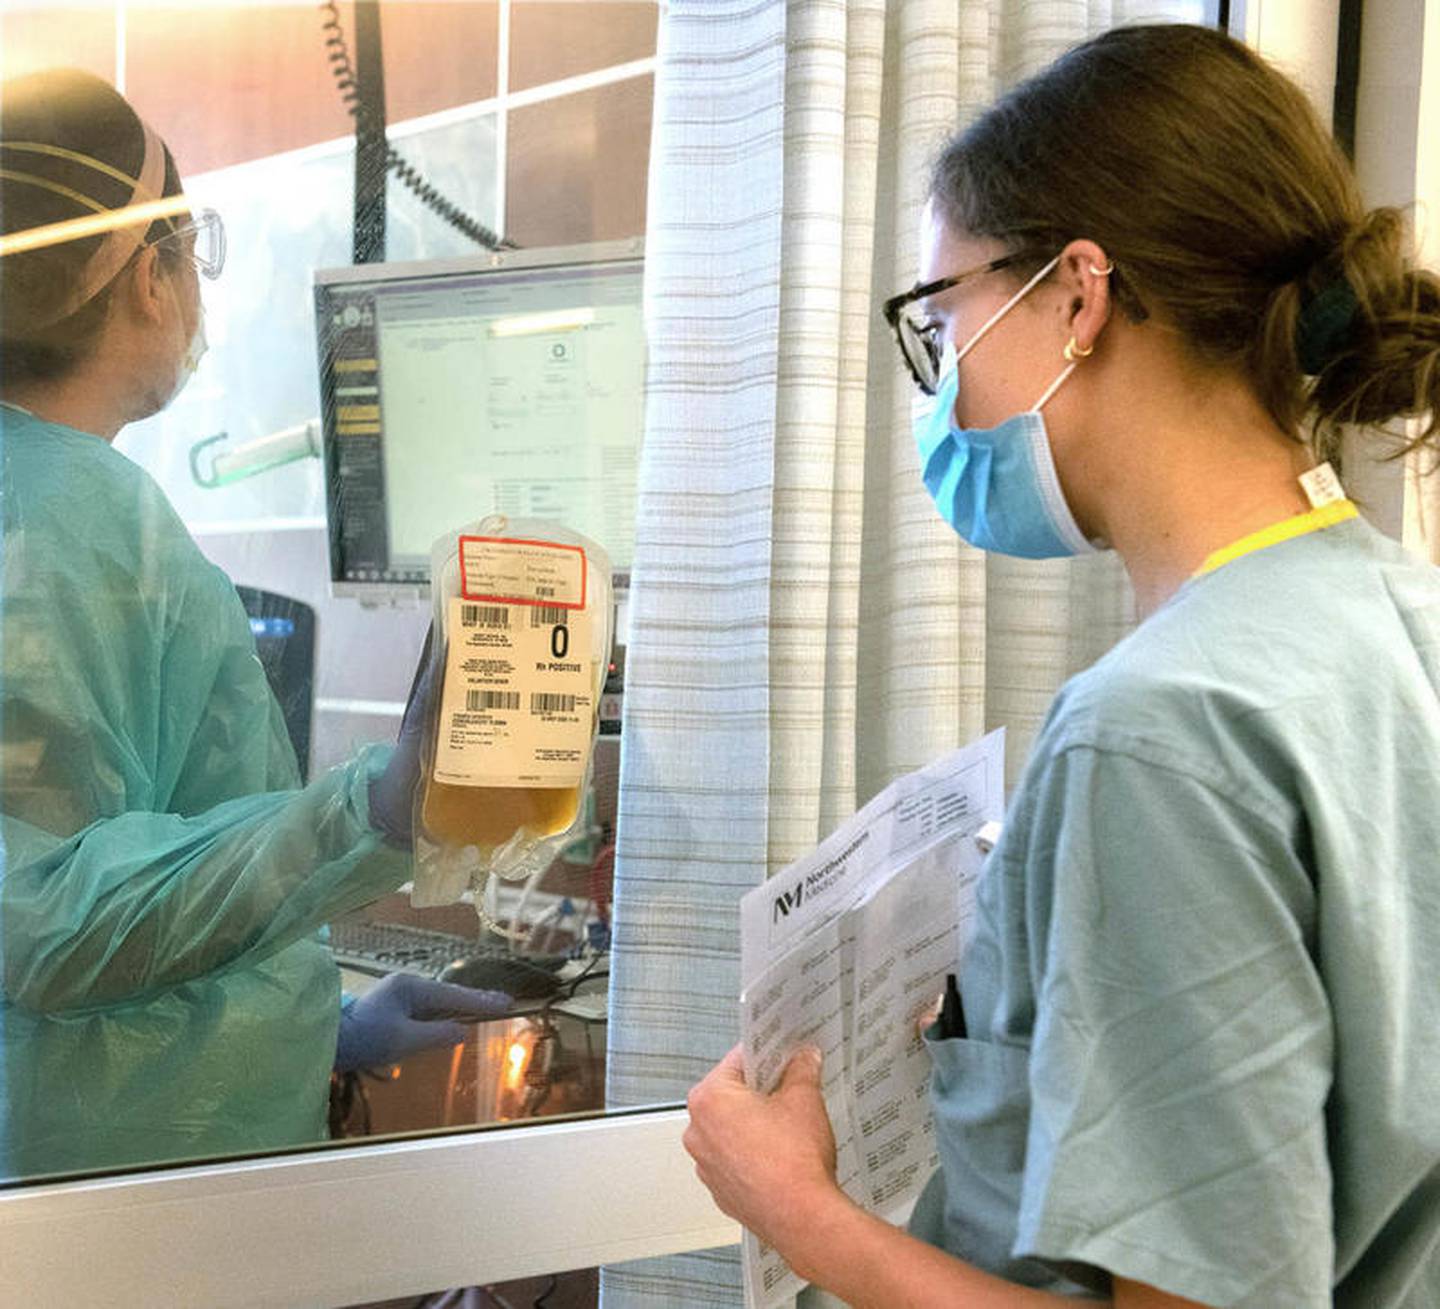 In hospitals across the country, including at Northwestern Medicine Kishwaukee Hospital in DeKalb, plasma from recovered COVID-19 patients, called convalescent COVID-19 plasma, is being used to help treat others diagnosed with the virus.